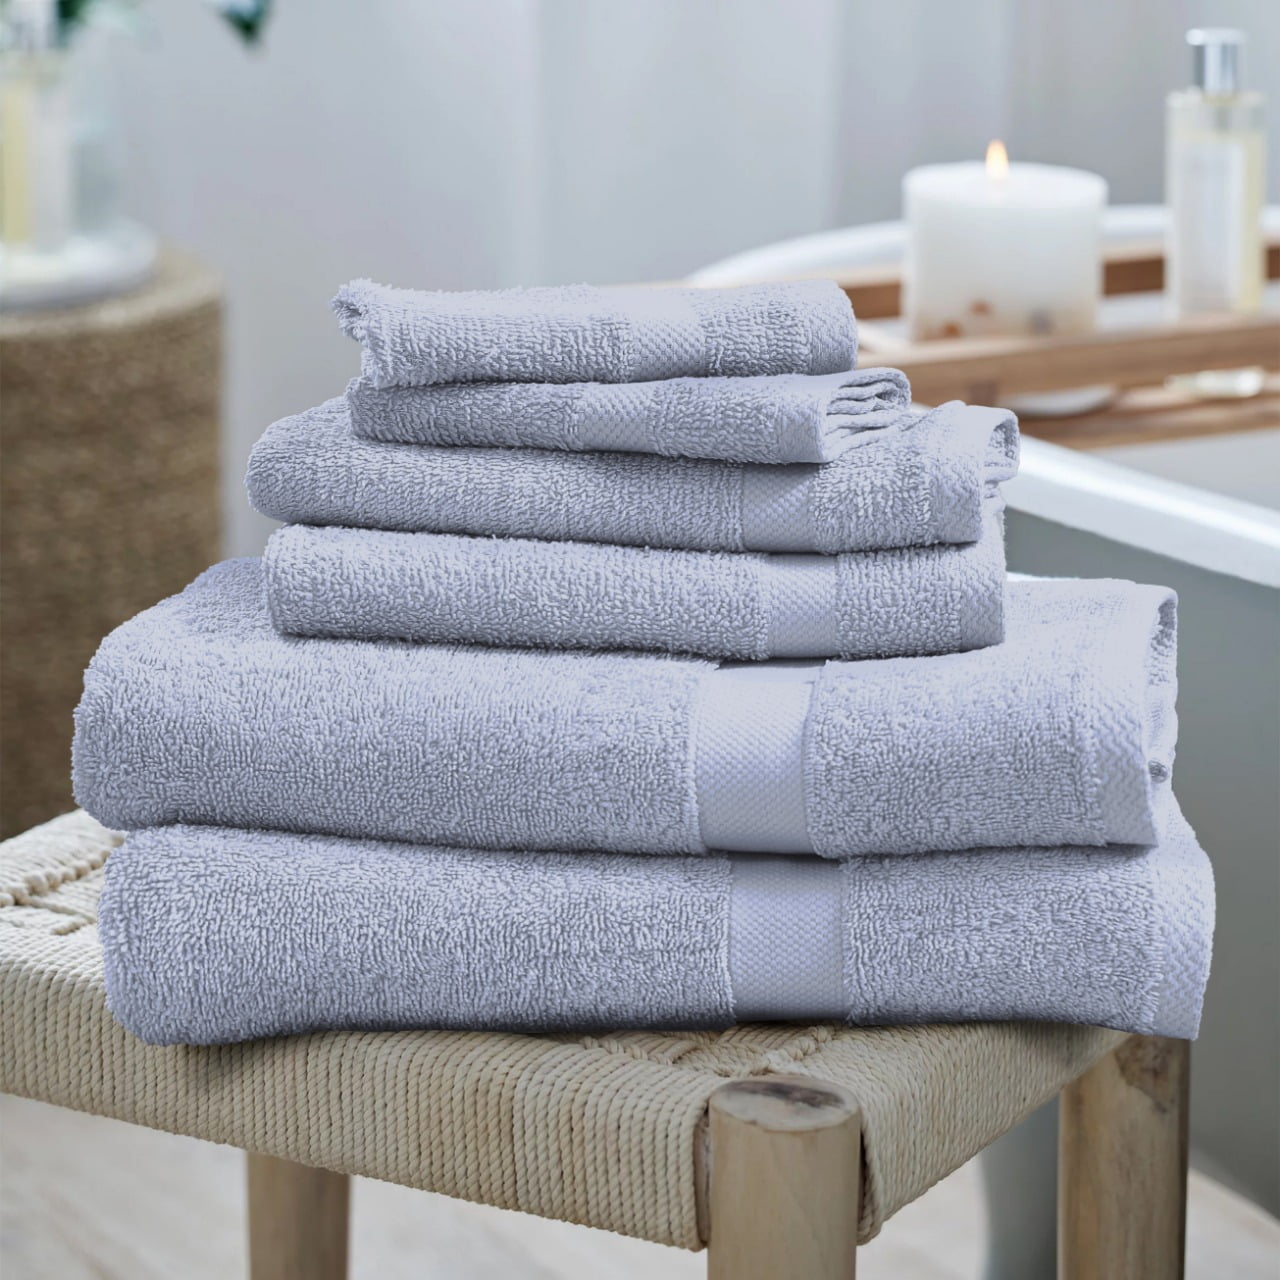 Alibi Bath Towel Set | 2 Pack of Soft Absorbent 30x56 Luxury Cotton Oversized Body Towels | Thick, Plush, Quick-Dry, Decorative Band, Woven Border & M